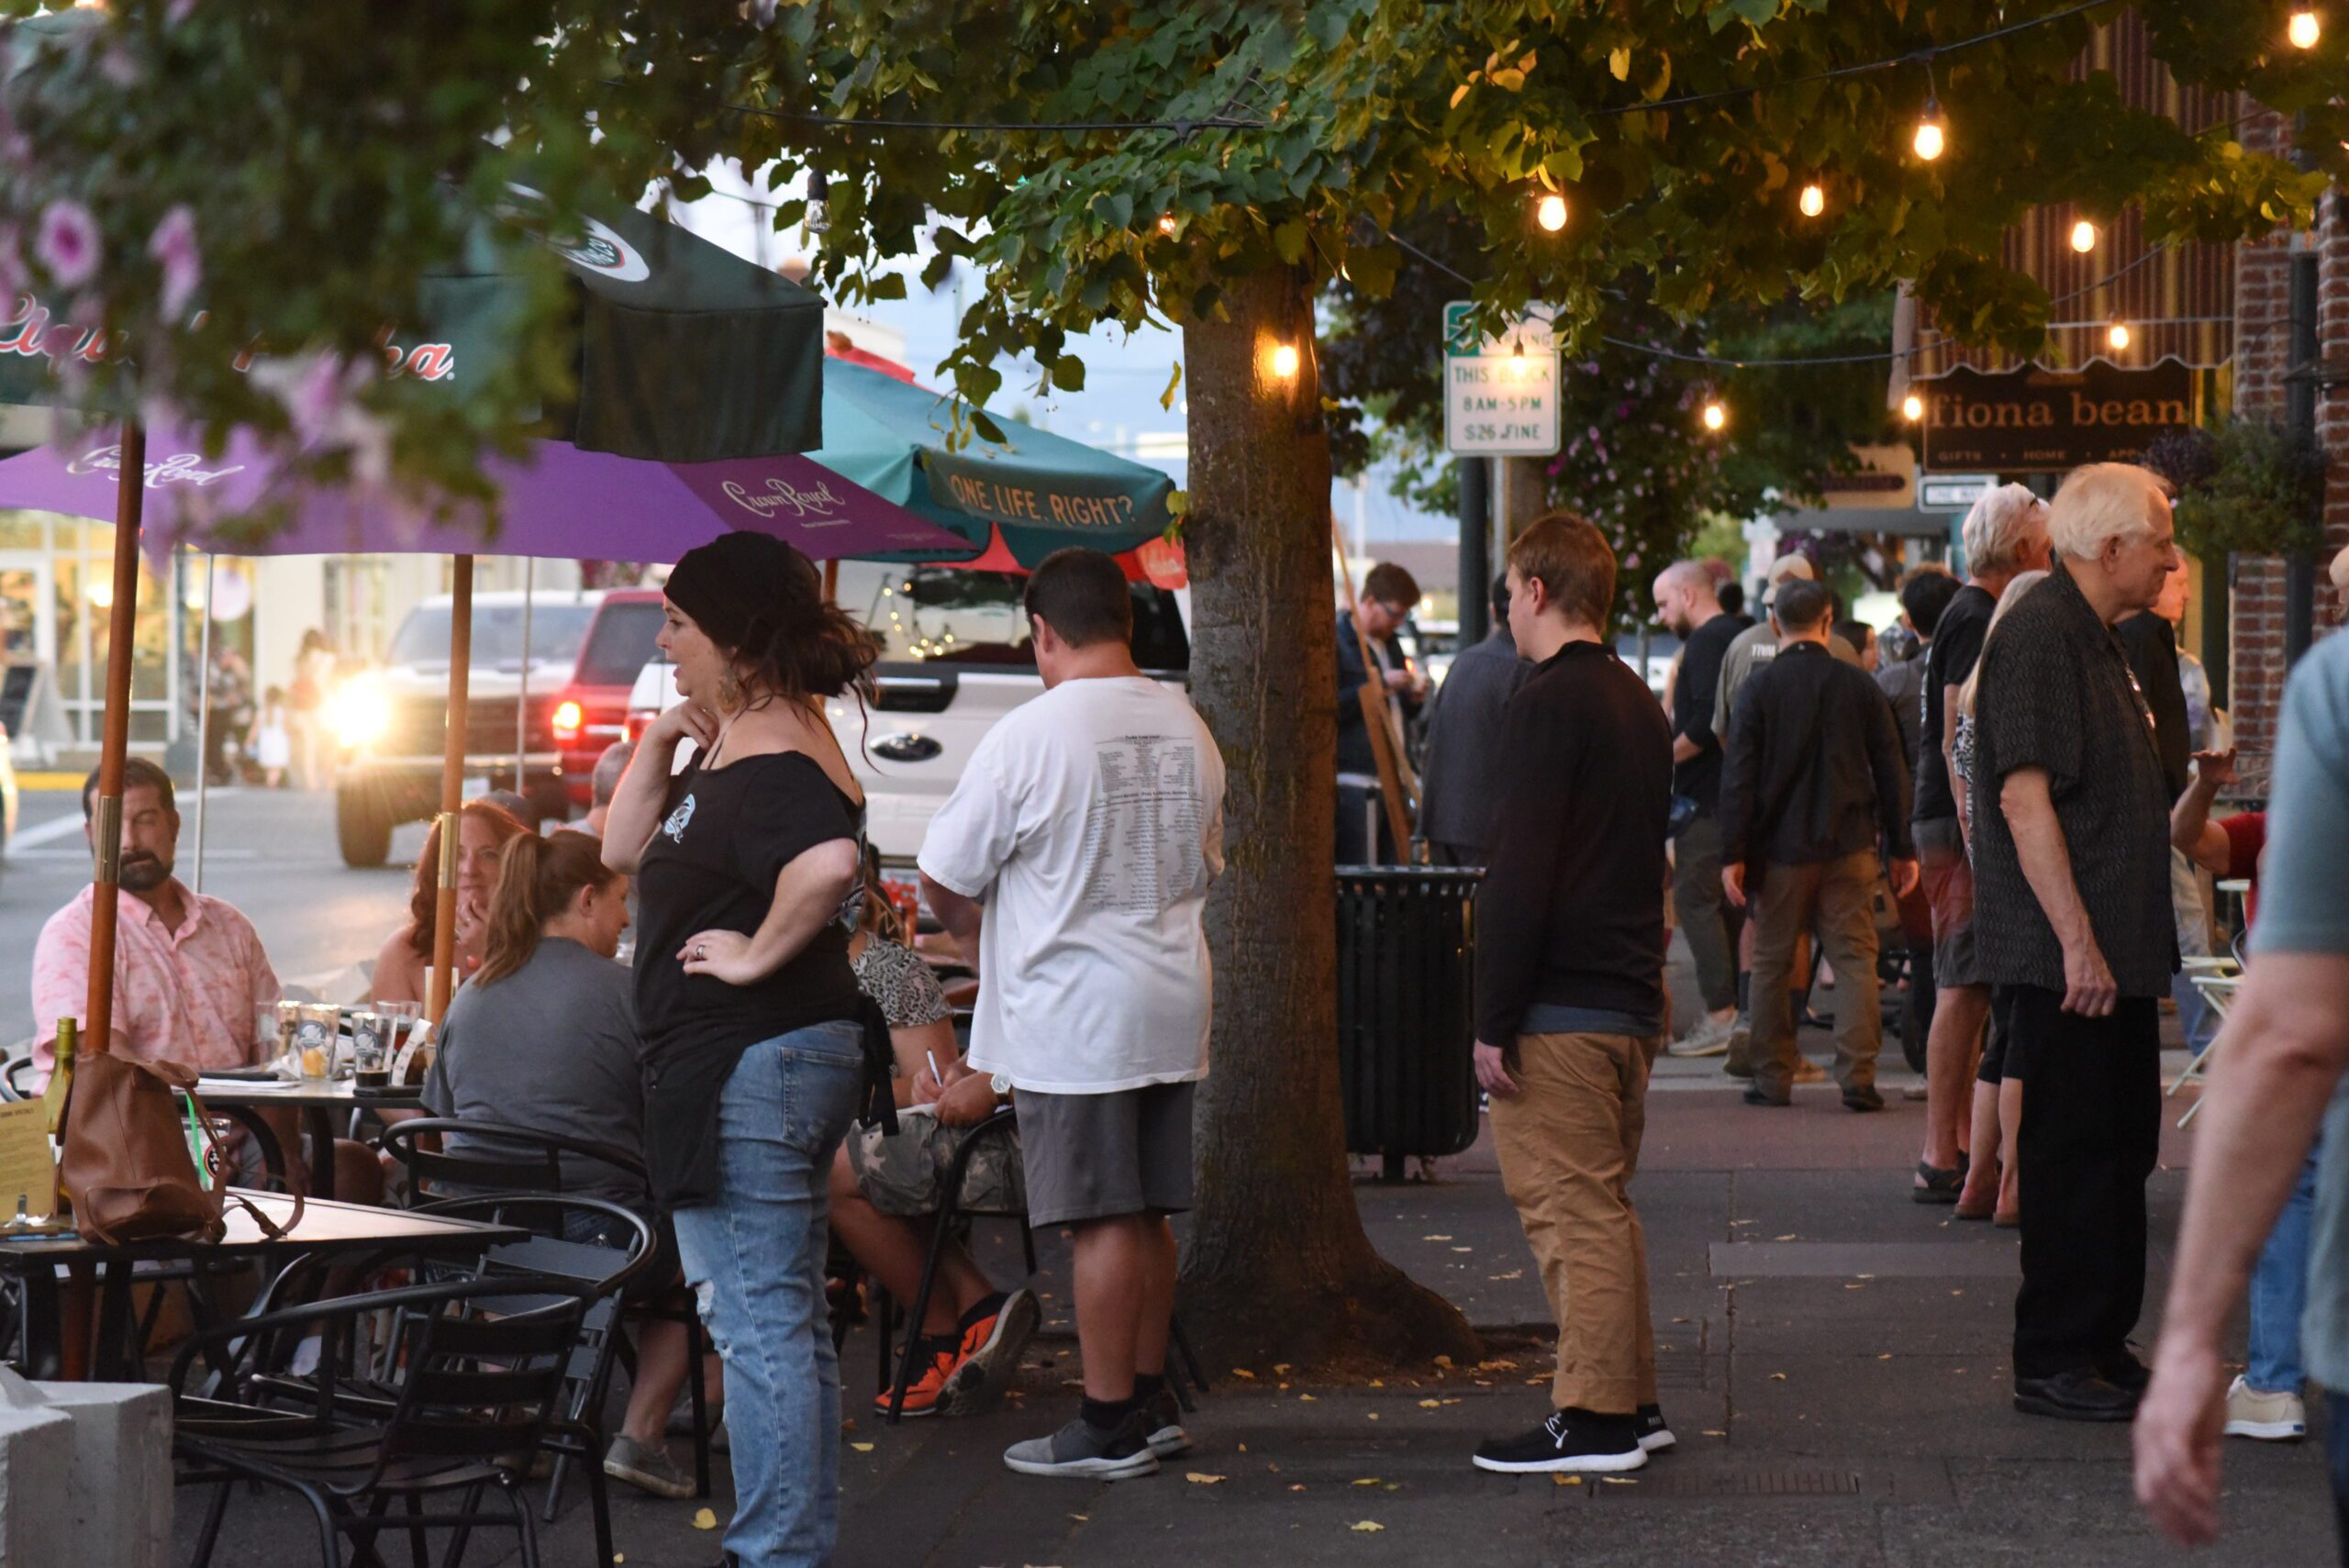 There is a busy street market, it appears to be dusk, but still light out, complimented by the glow of string lights. There is a crowded sidewalk with pedestrians and vendors in downtown Grants Pass.